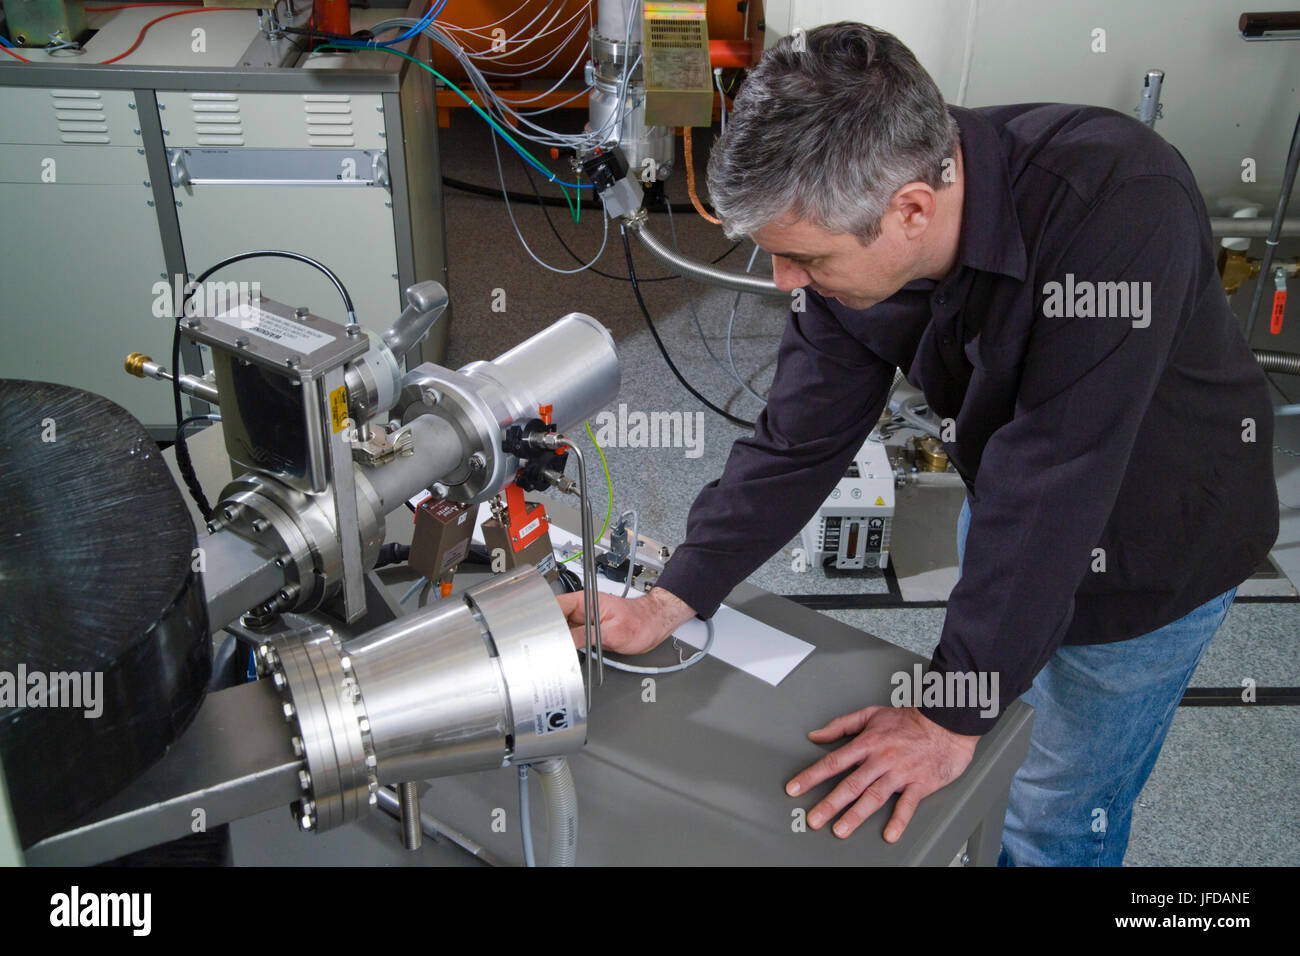 Scientist checks the final stage detector of the accelerator mass spectrometer which measures the carbon isotope ratios for radiocarbon dating. Stock Photo